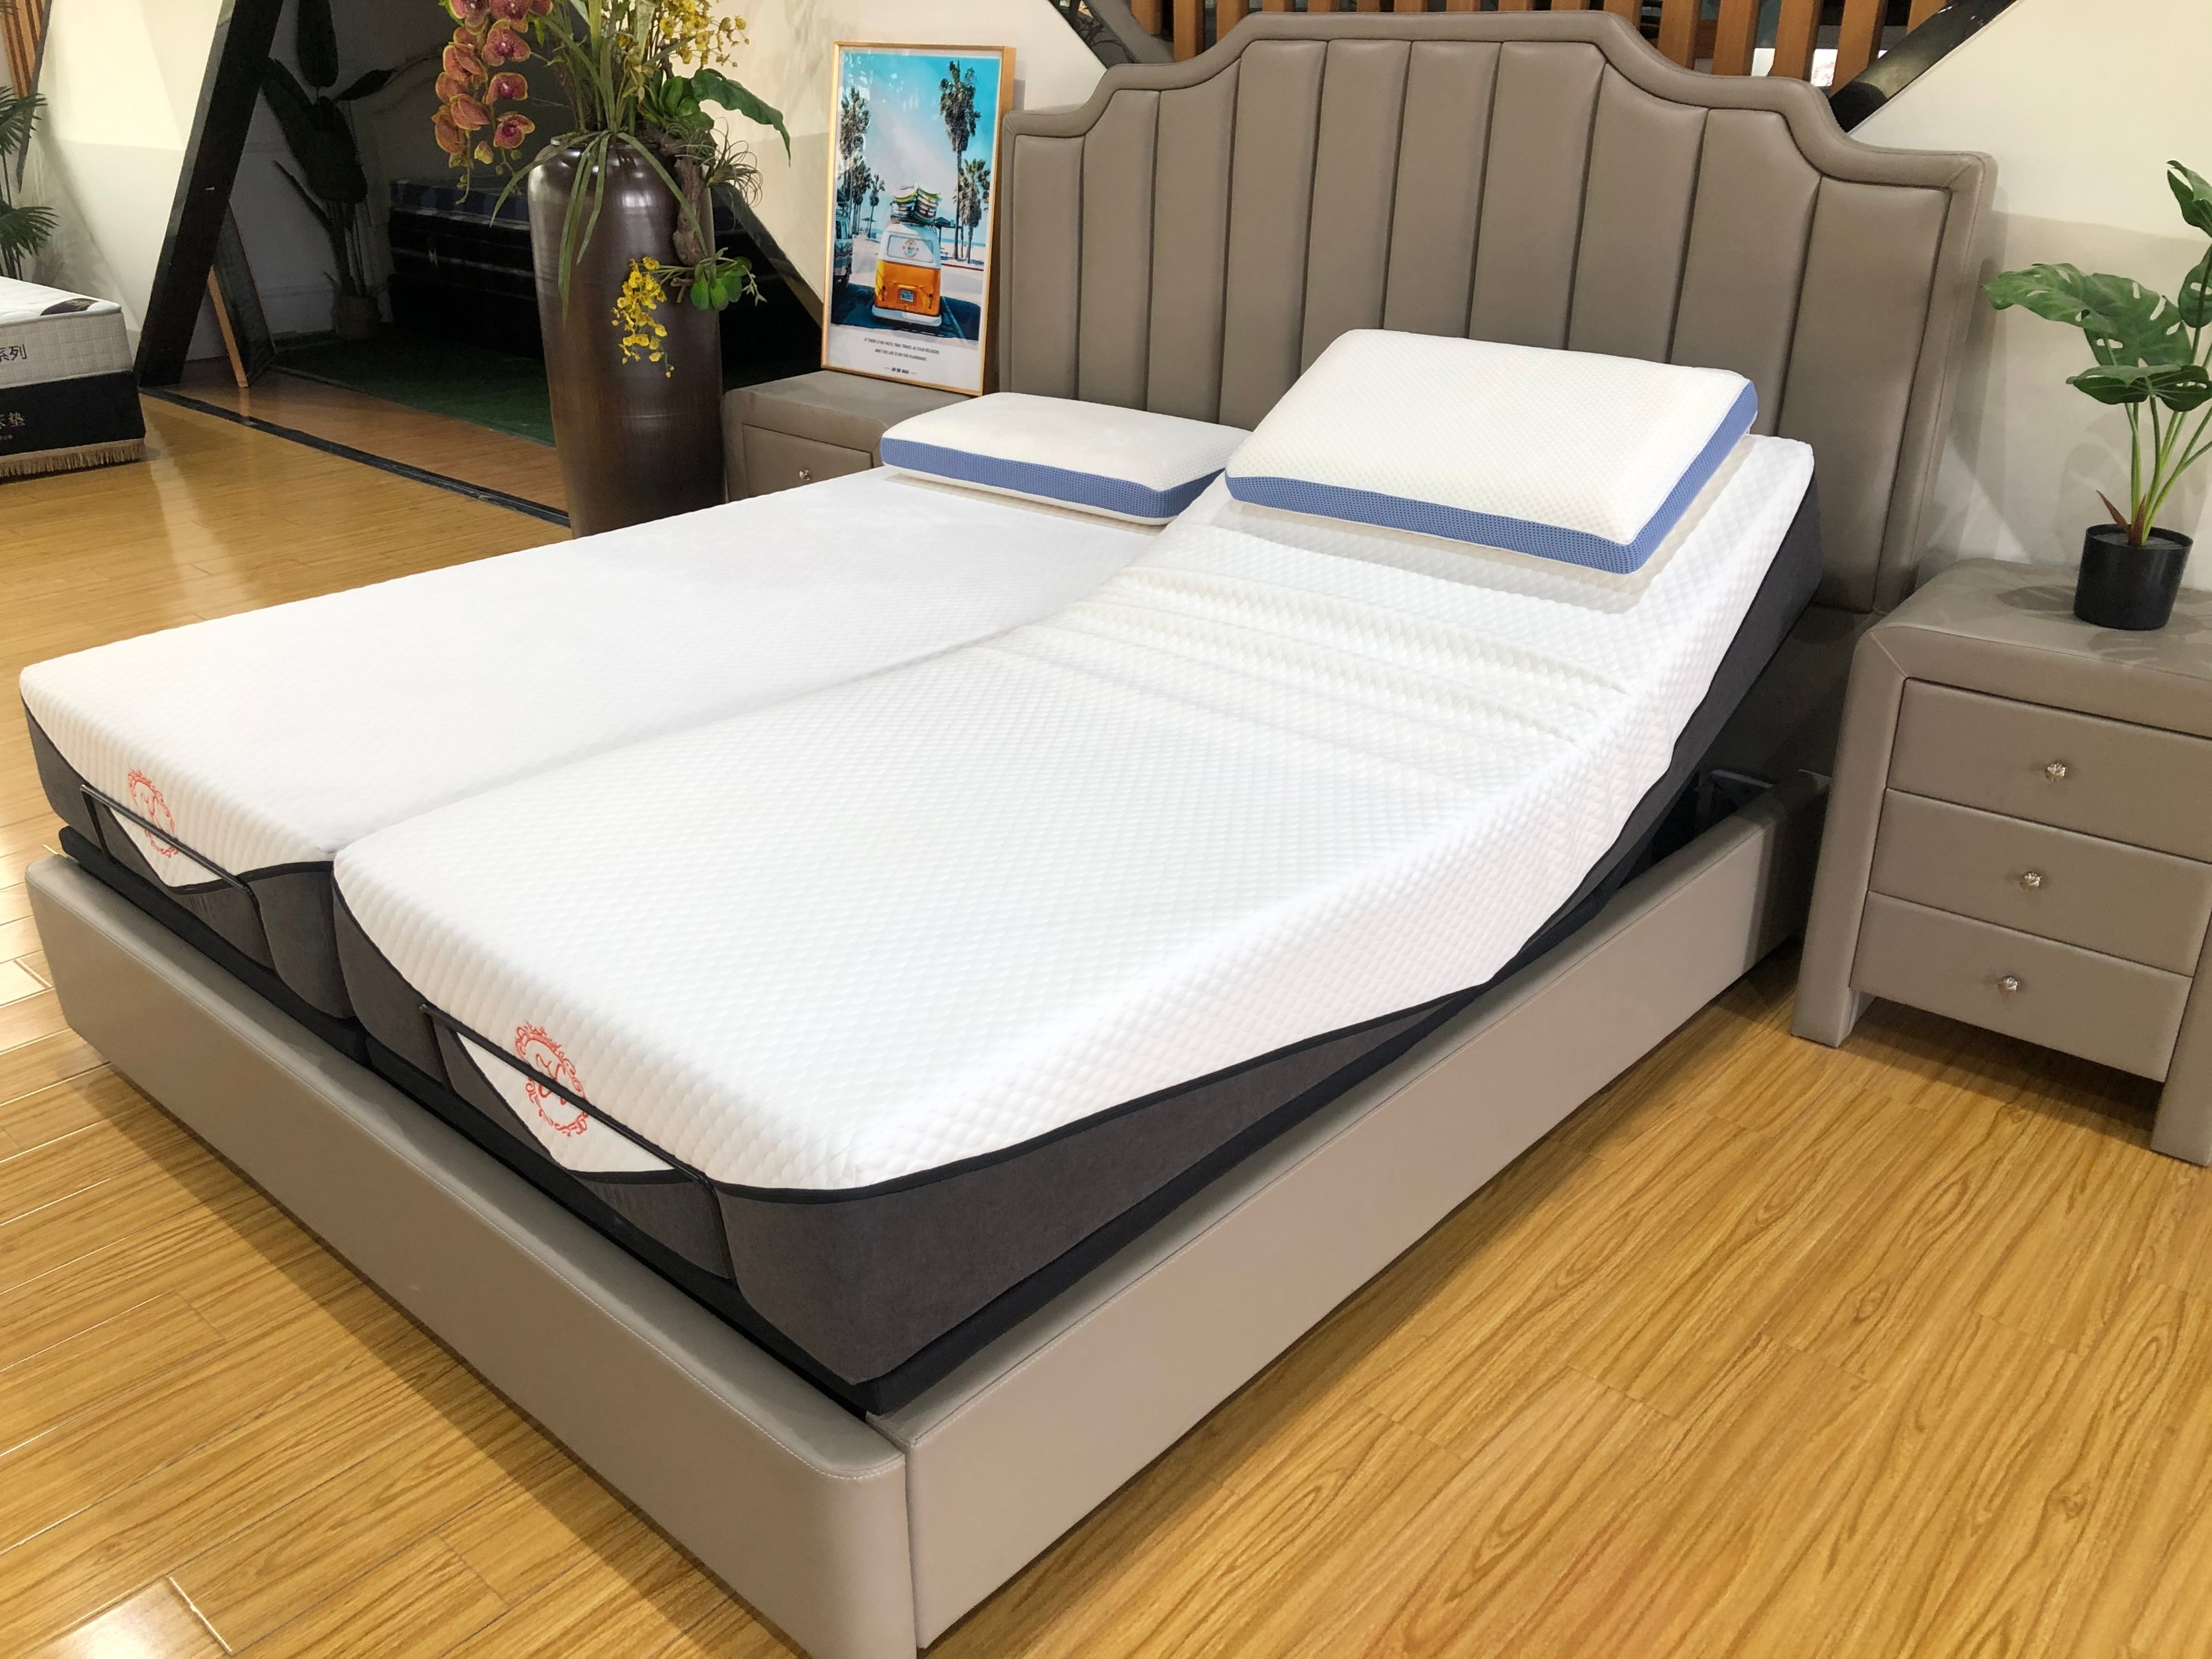 What are the advantages of a split mattress？